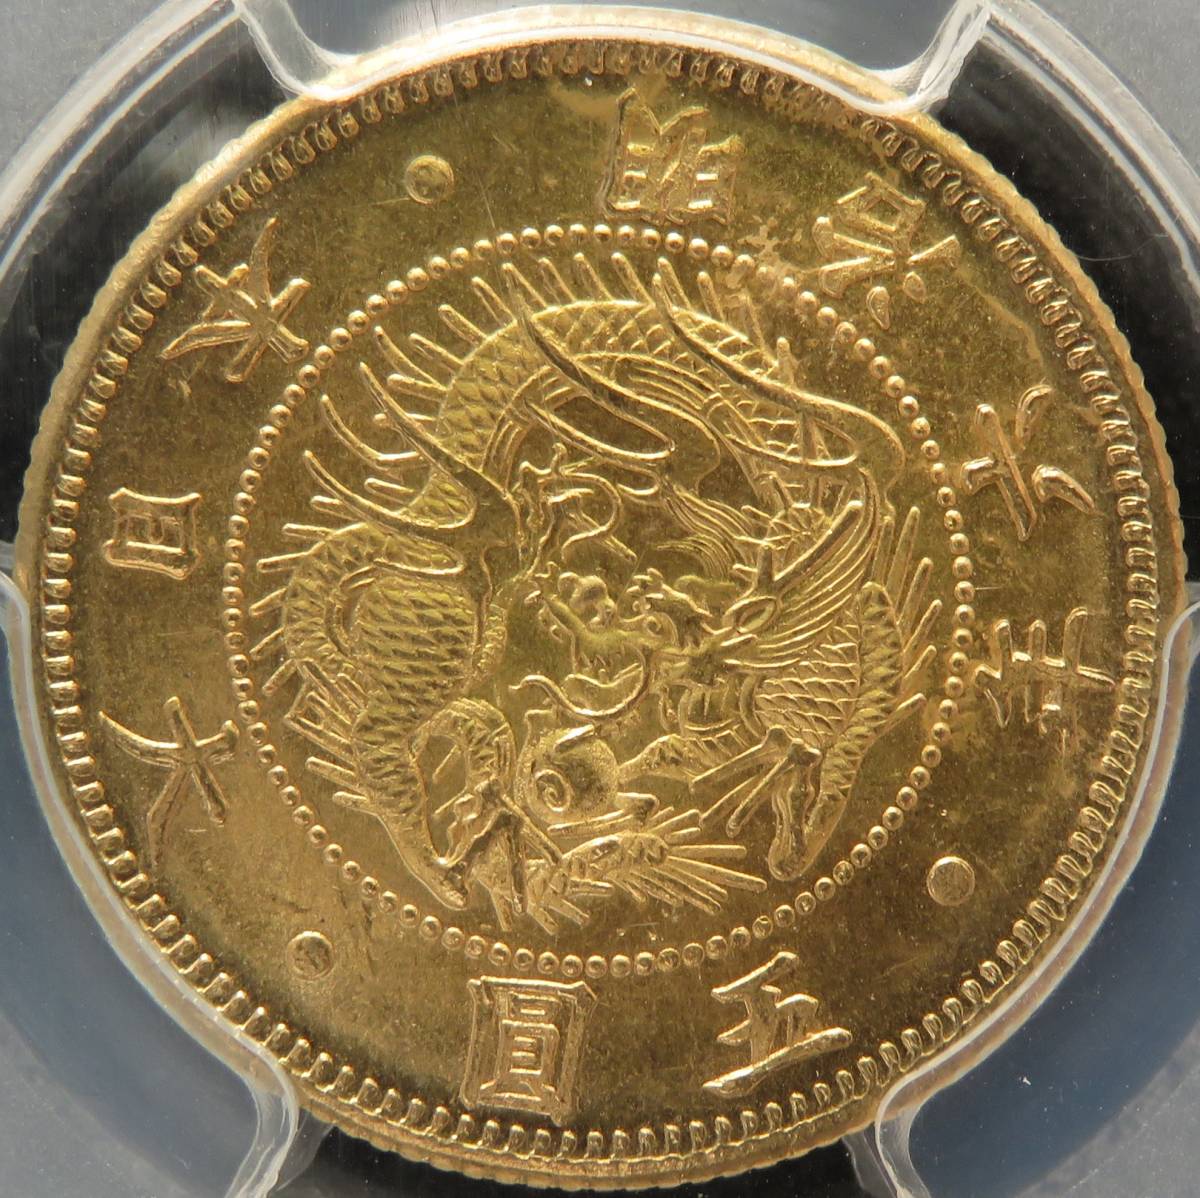  Meiji 6 year MS66 old 5 jpy gold coin PCGS judgment complete unused FDC Japan 5.1873 year UNC modern times dragon Gold coin old coin money . small 